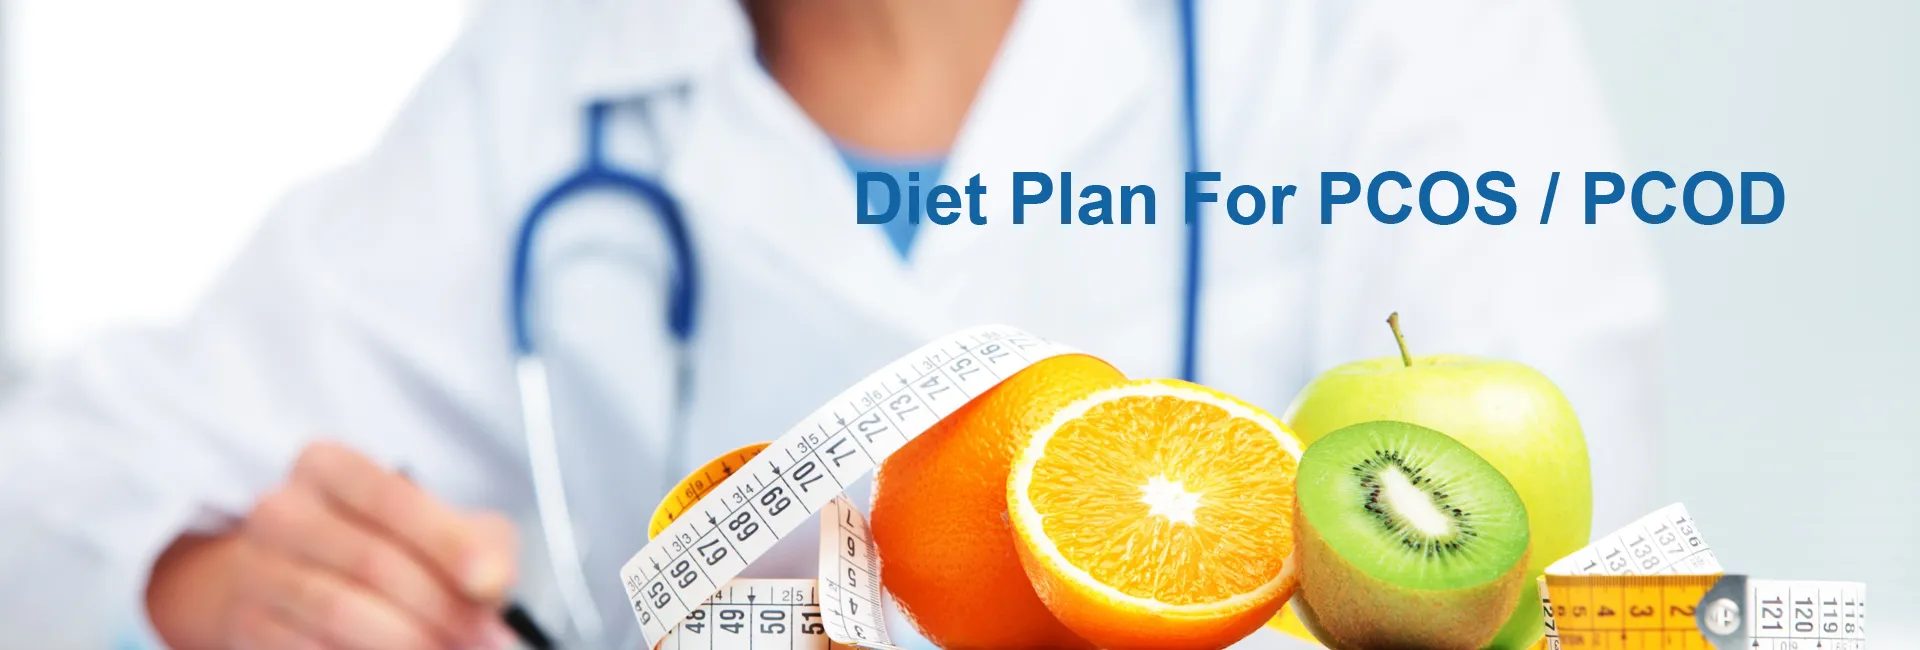 Diet Plan For PCOS / PCOD In La Malbaie